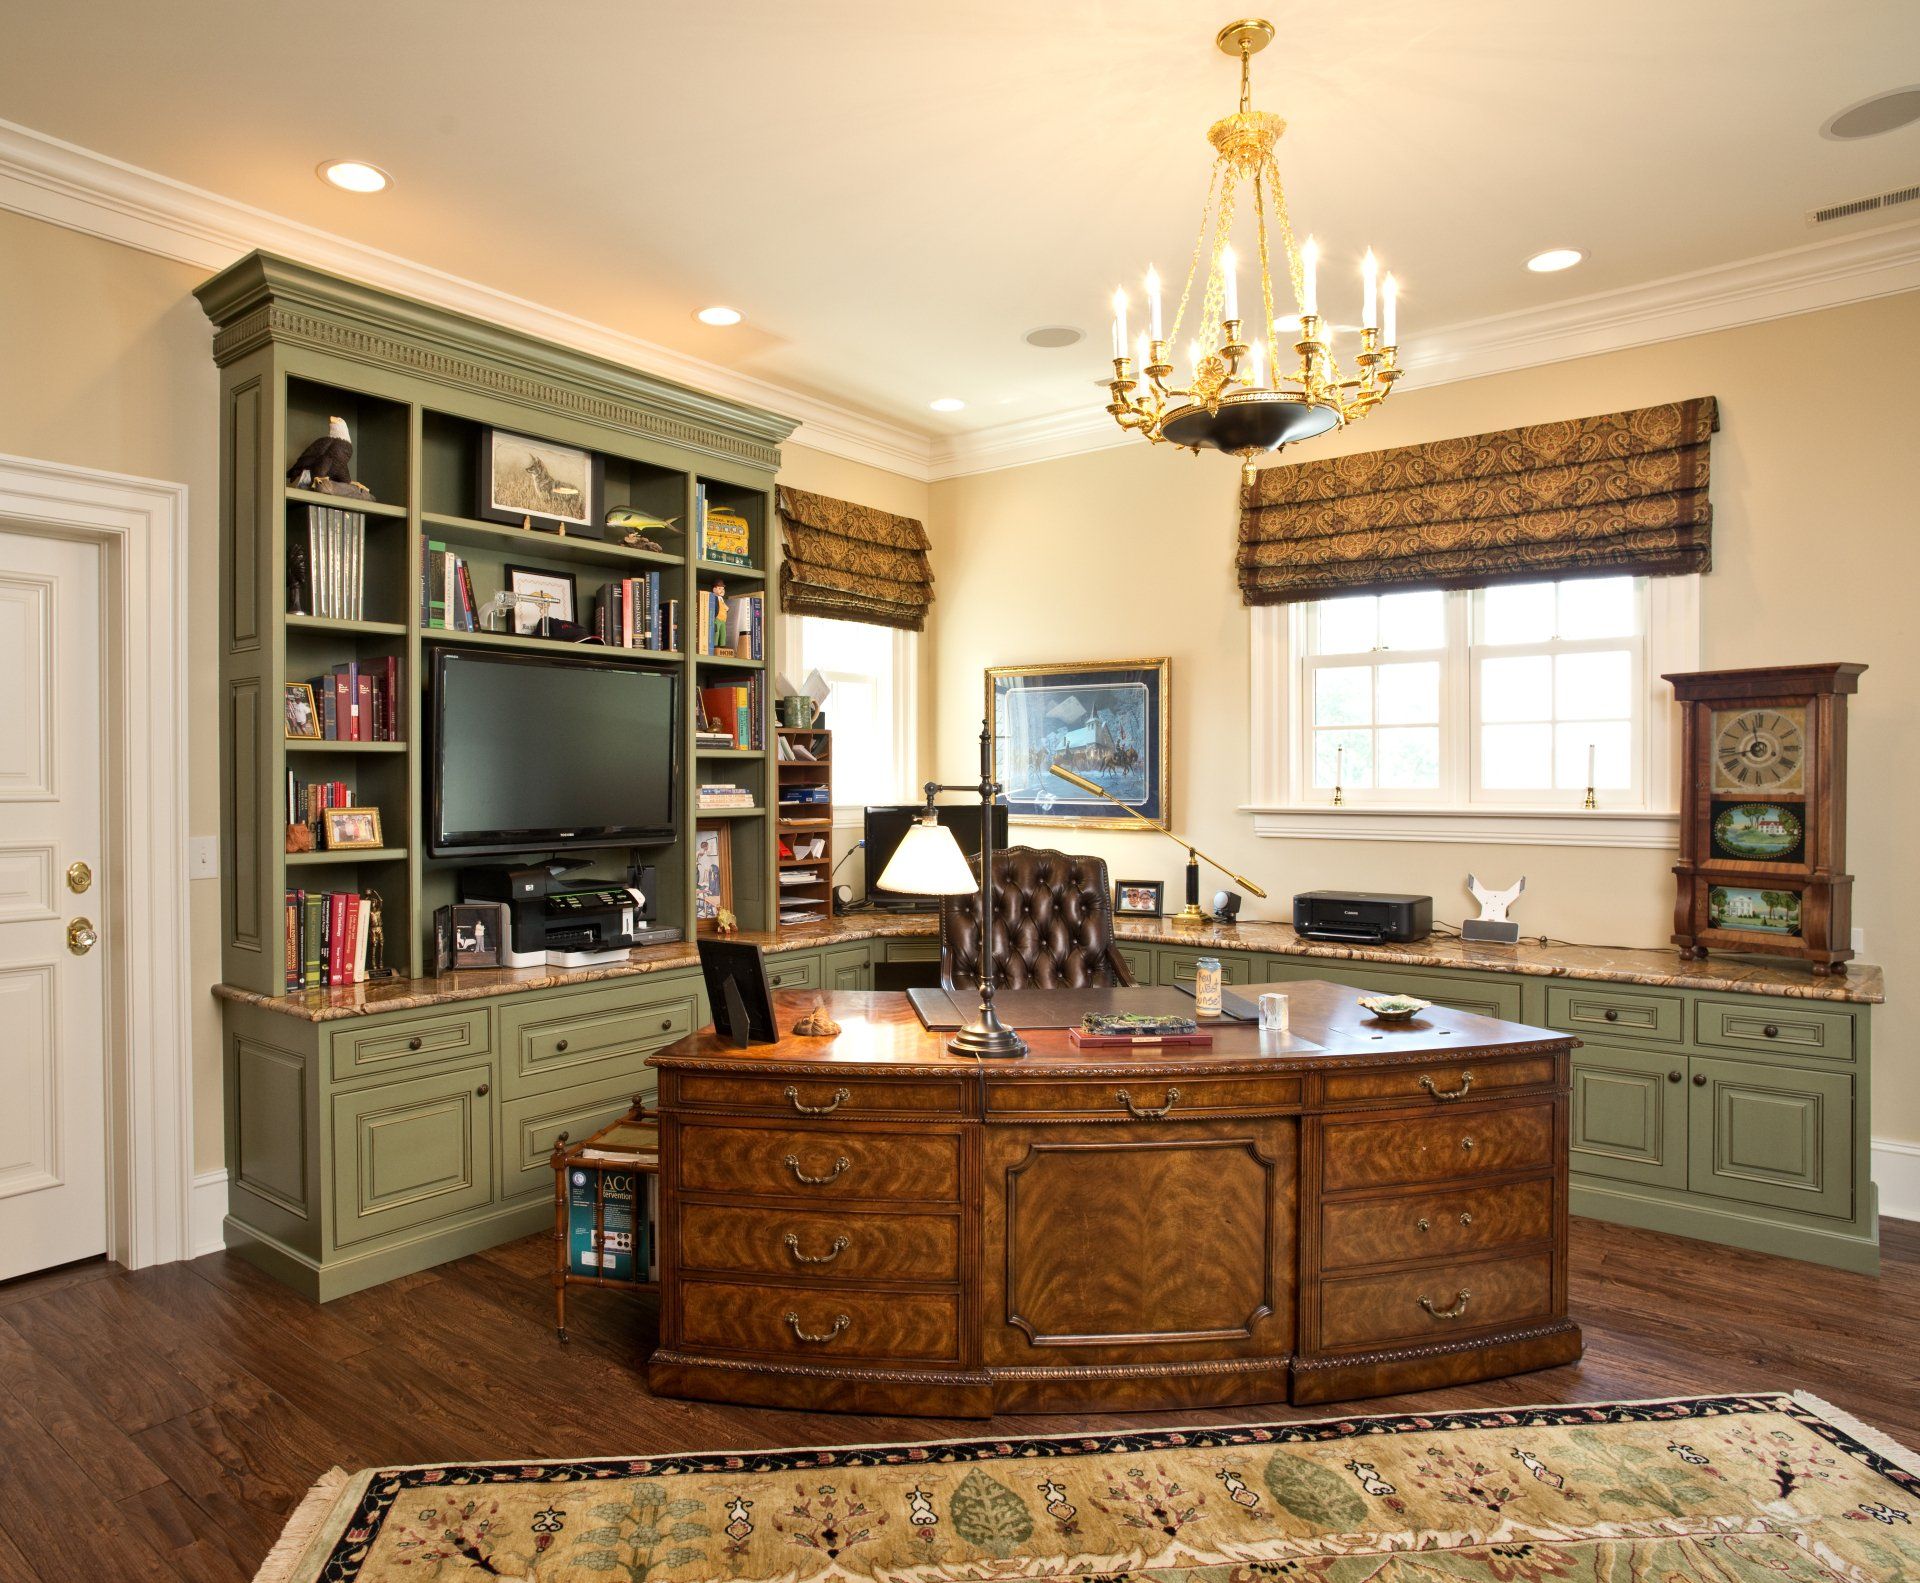 A beautiful office setting with a wooden desk surrounded by green cabinets.